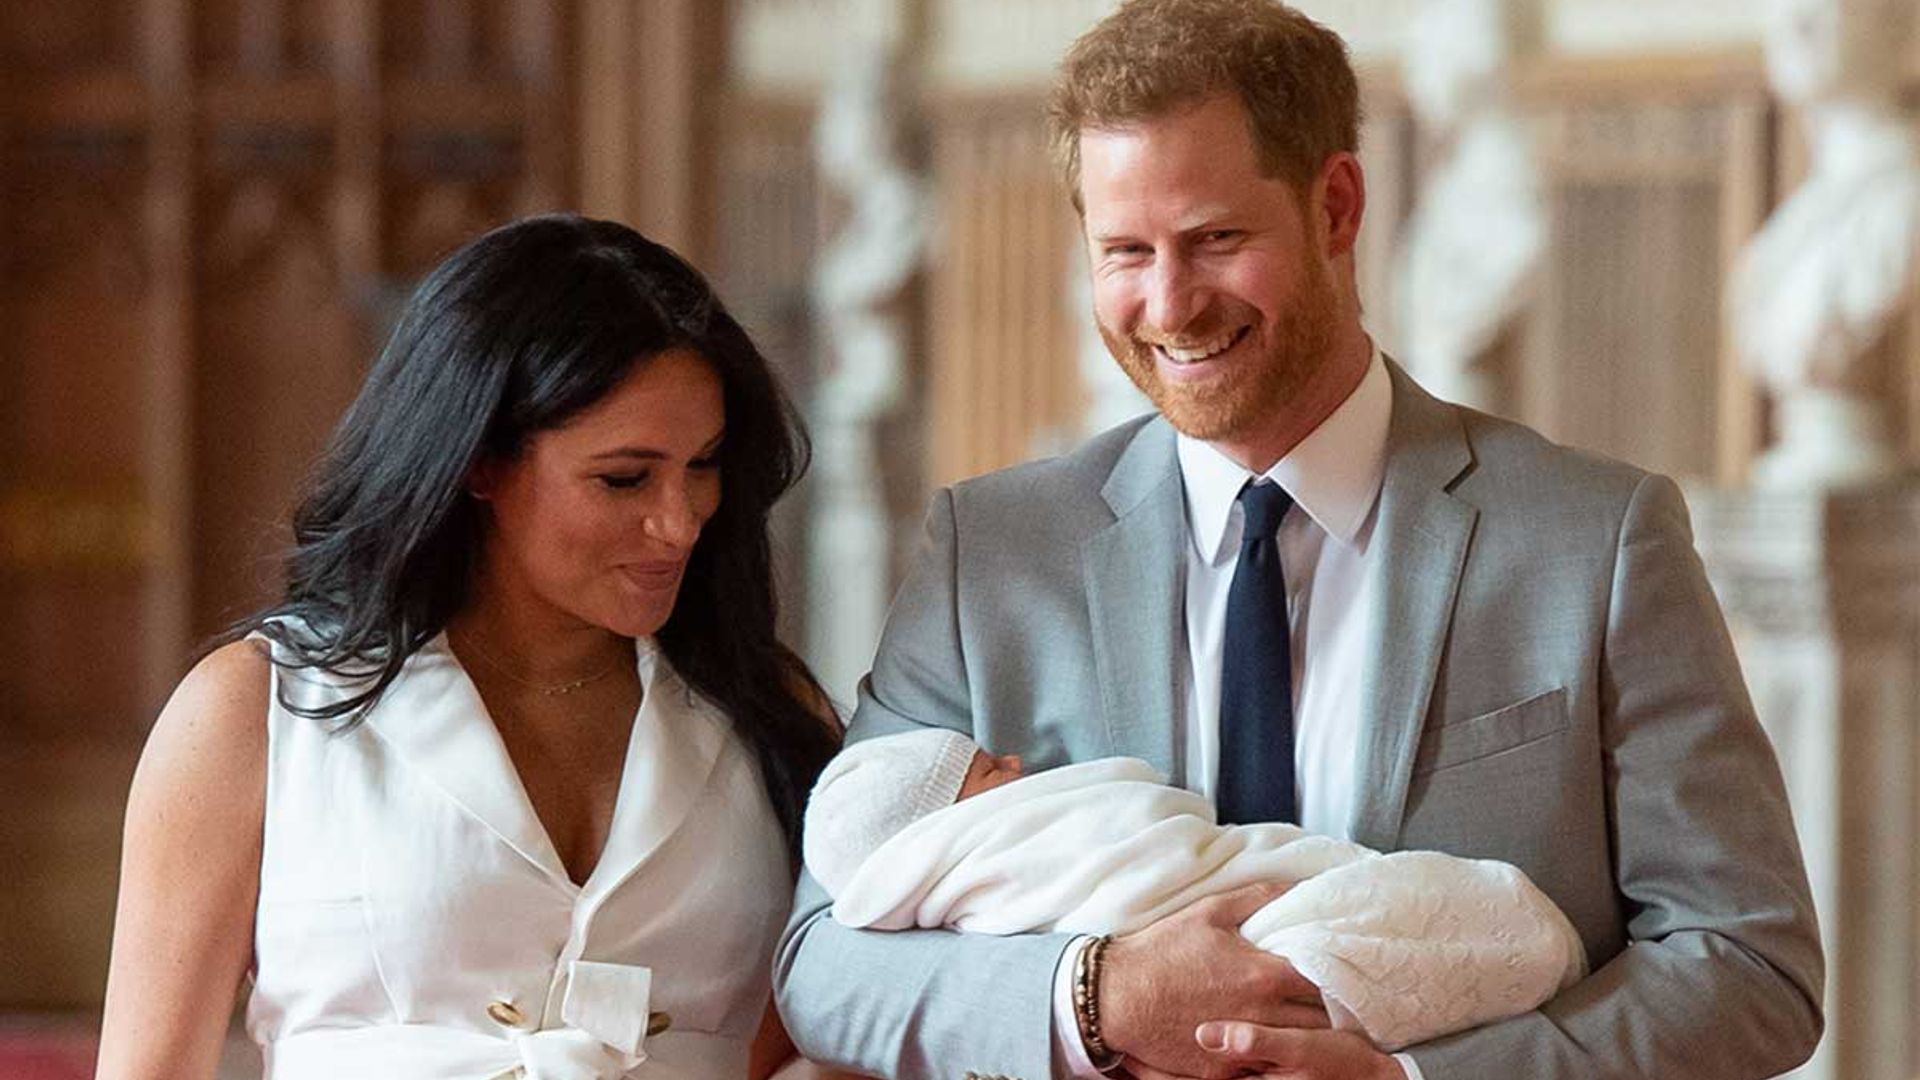 Royal correspondent reveals what it was like to meet Meghan Markle and Prince Harry's baby